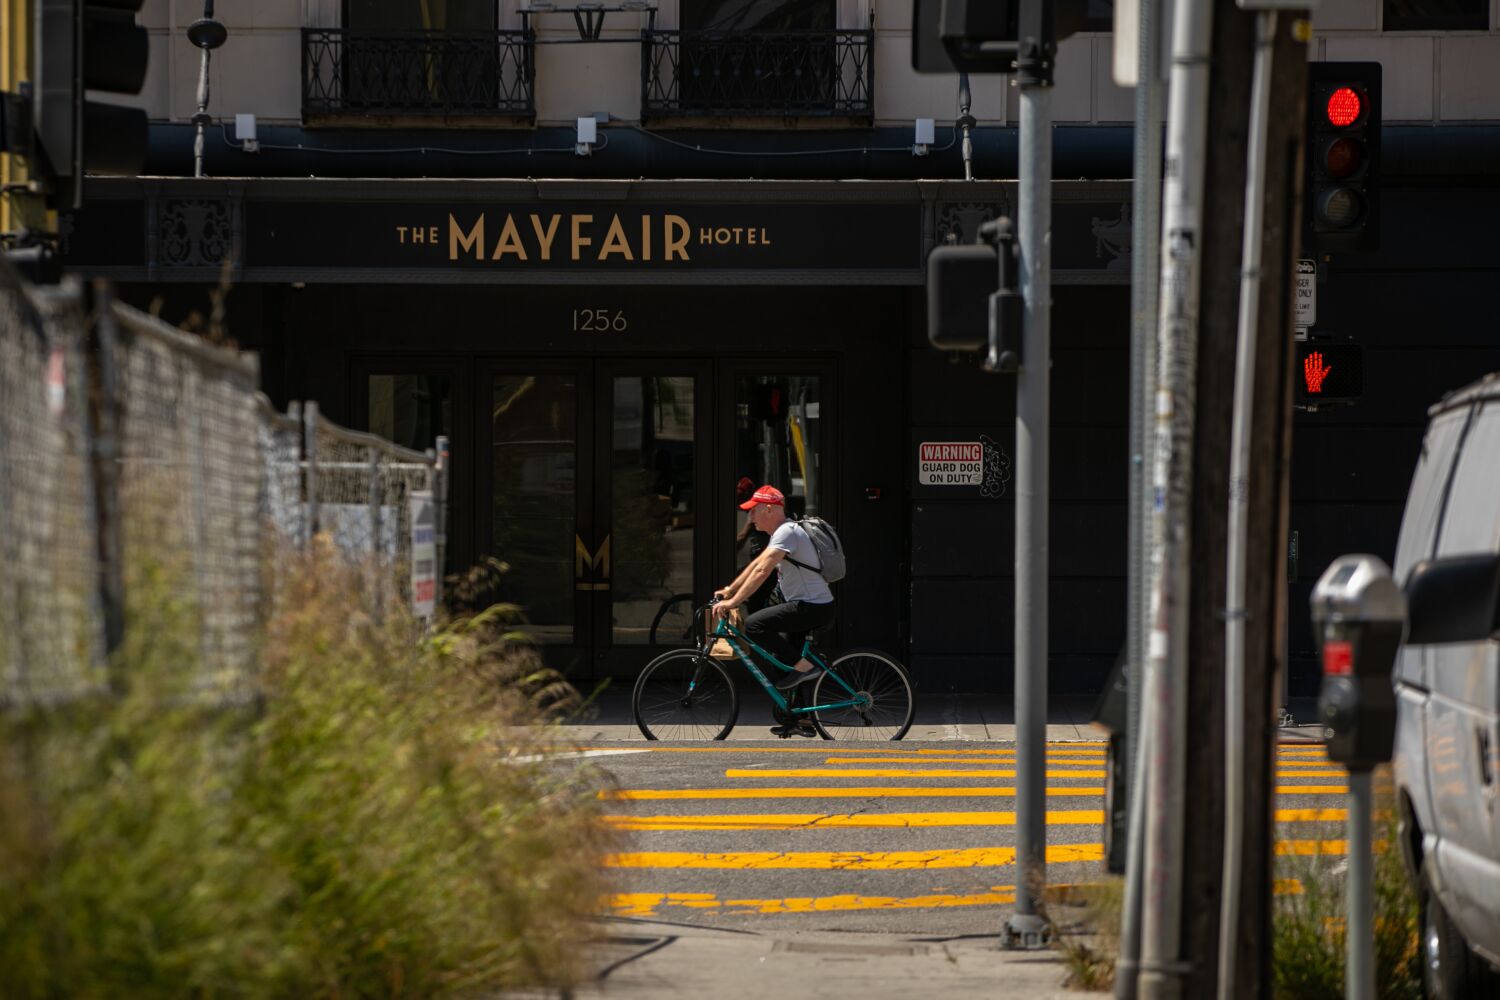 Bass wants to use the Mayfair Hotel to fight homelessness. The cost? $83 million